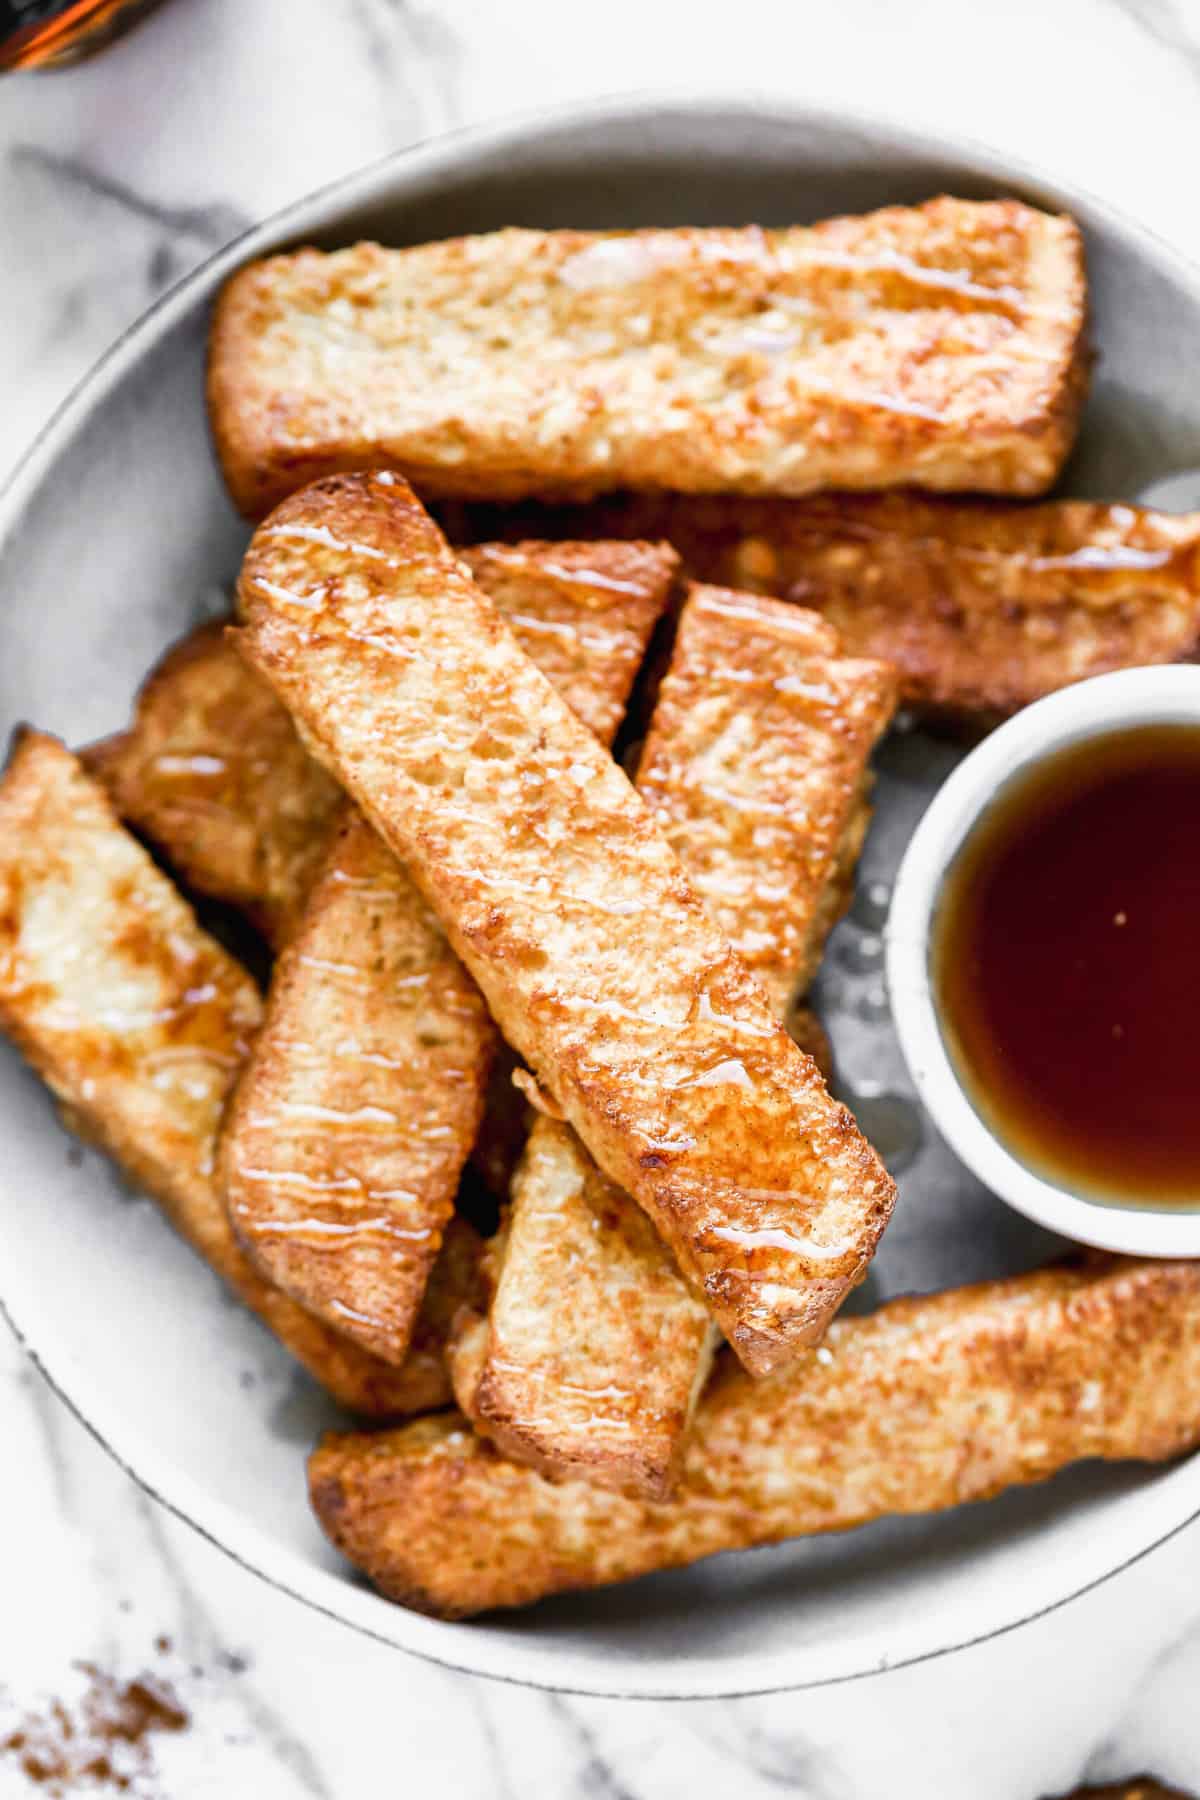 A delicious french toast stick recipe, all on a plate ready to enjoy.